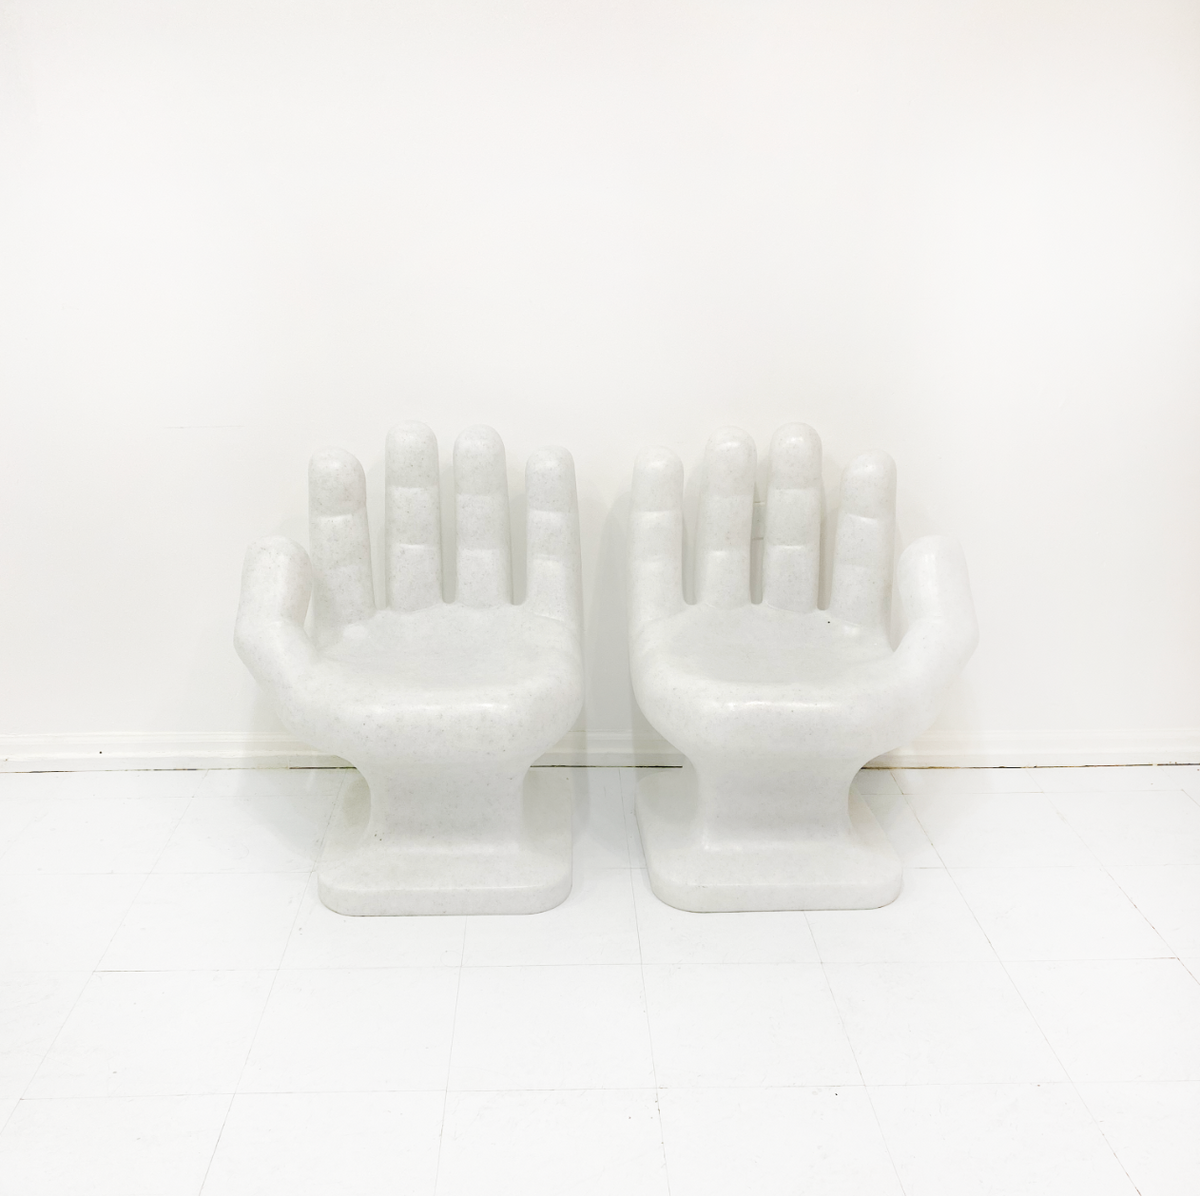 Hand Chair With Fingers